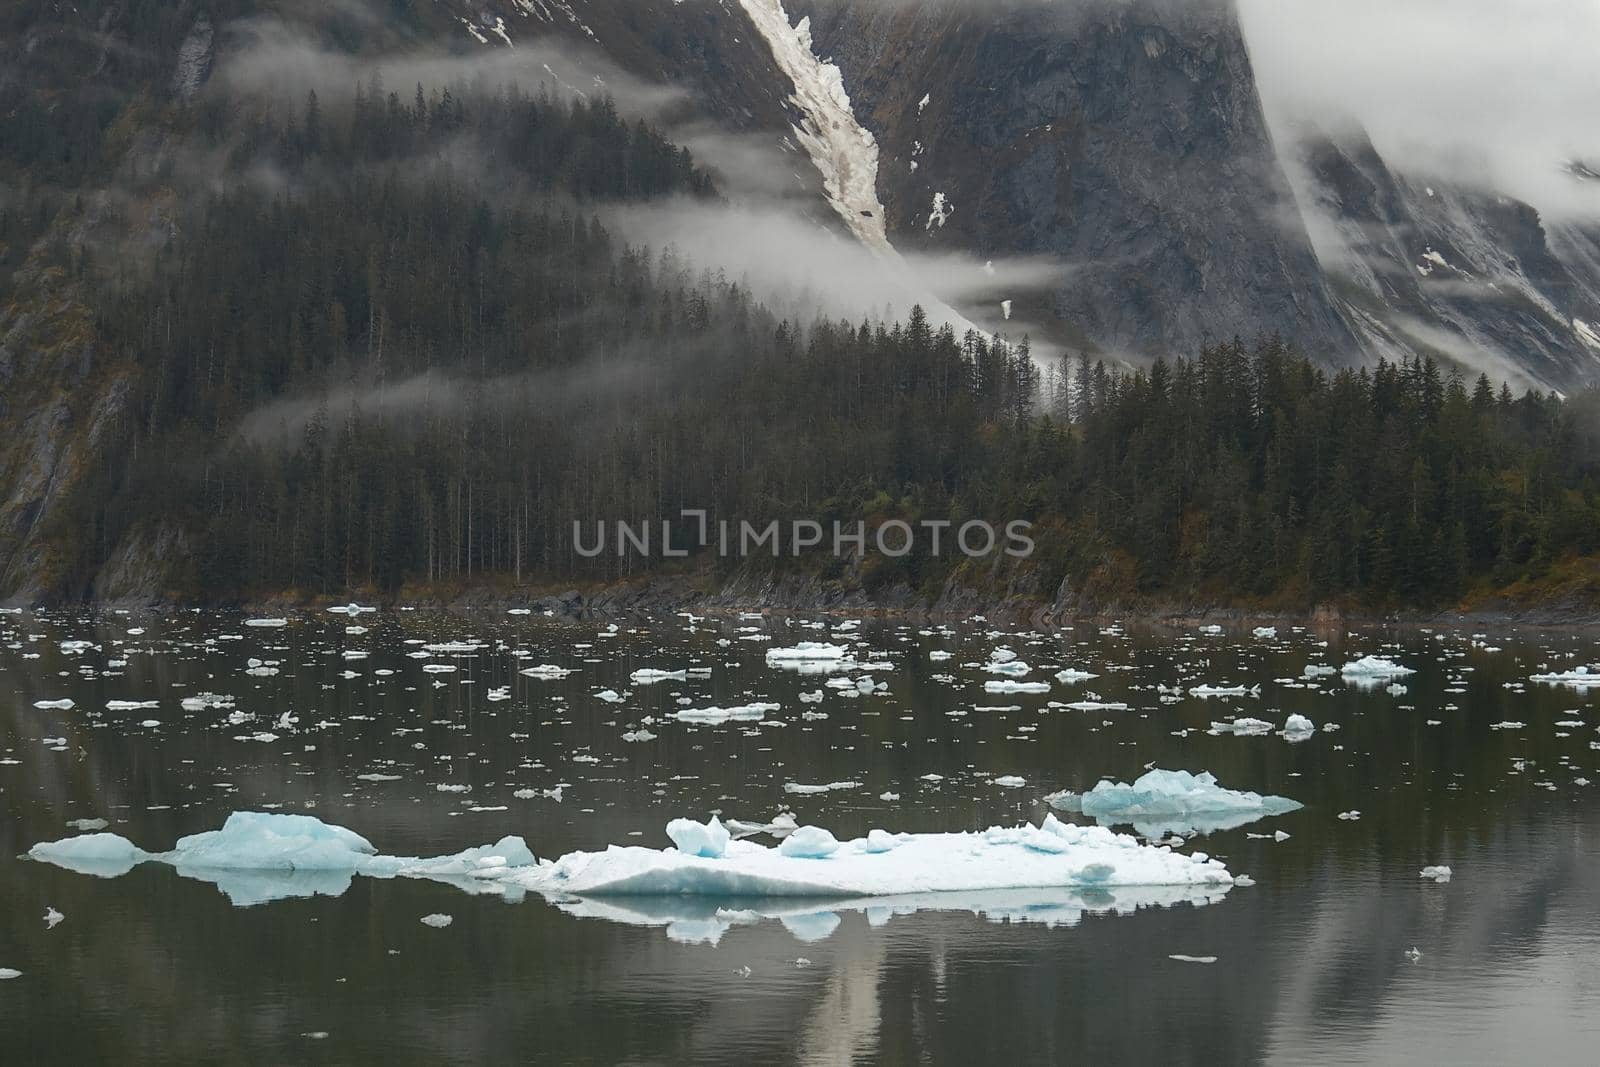 Landscape at Tracy Arm Fjords in Alaska United States by wondry